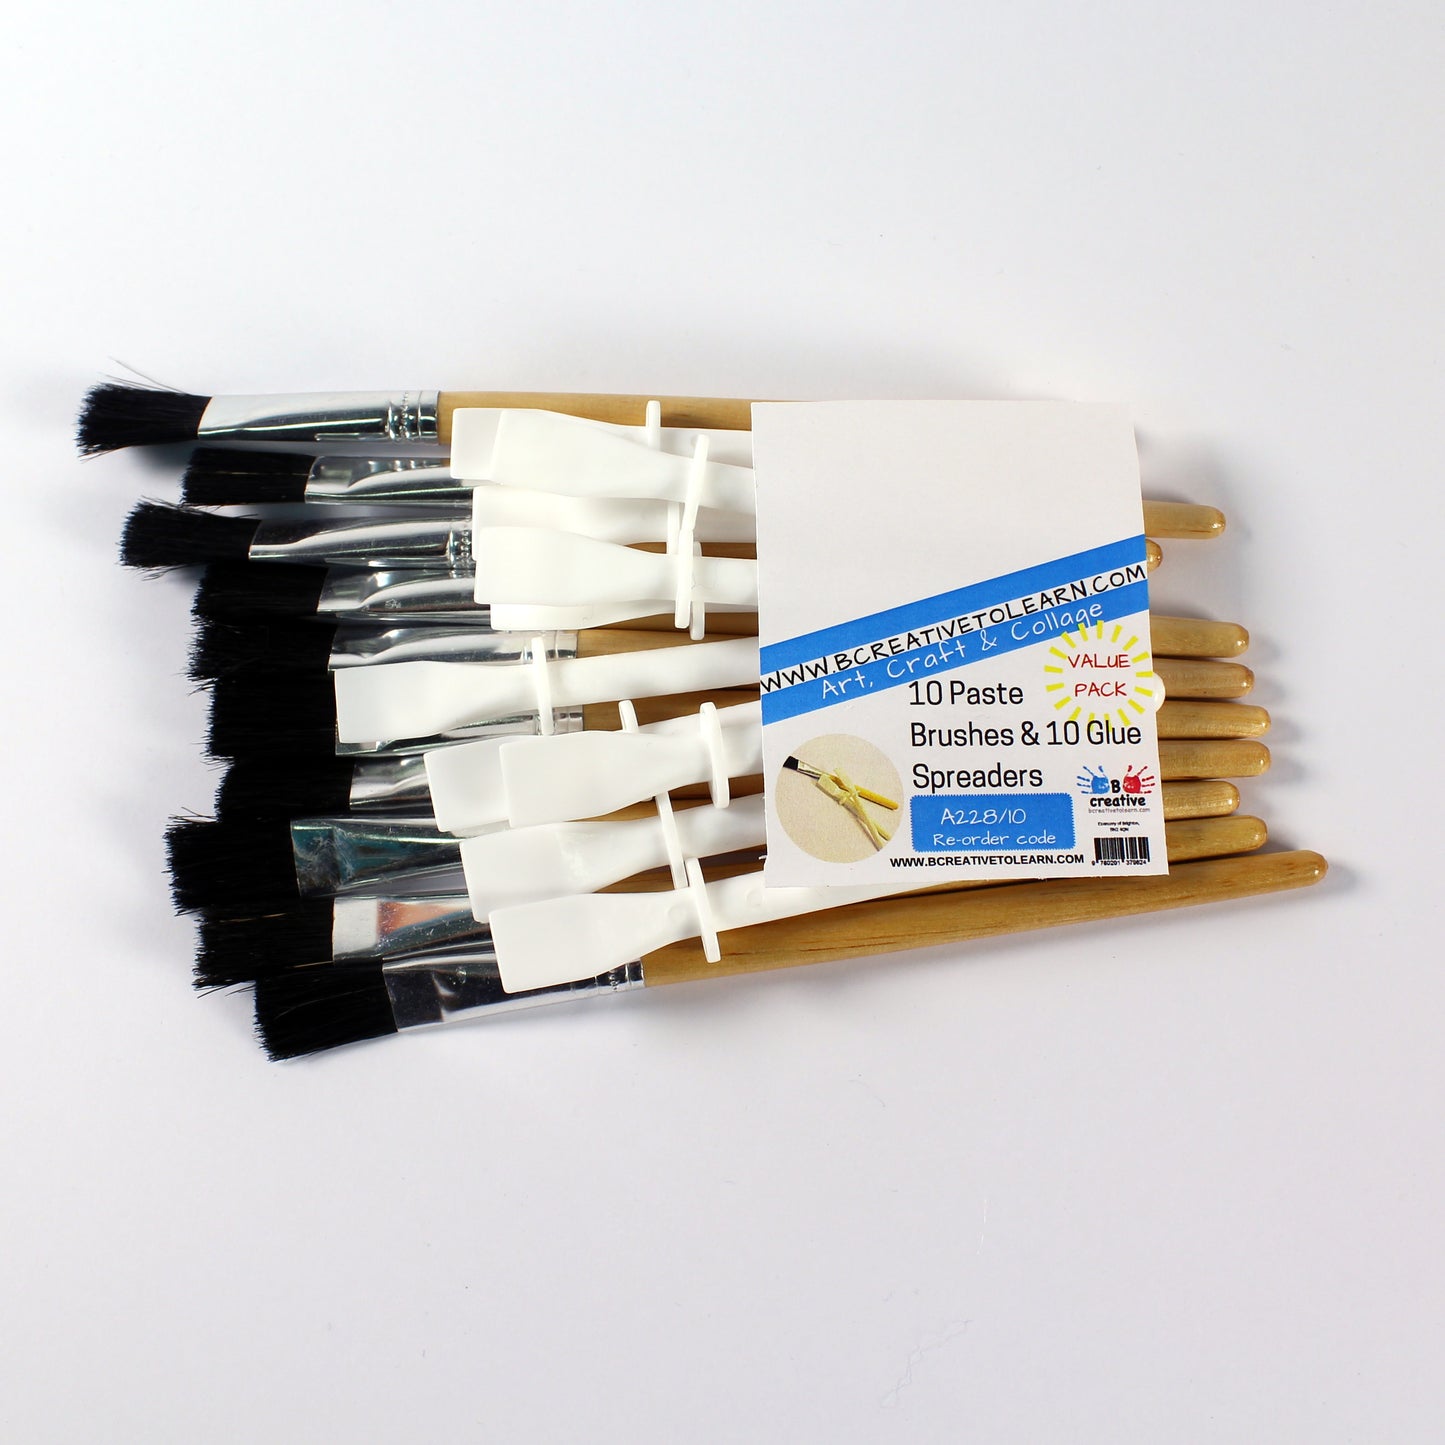 Paste Brushes and Glue Spreaders Pack